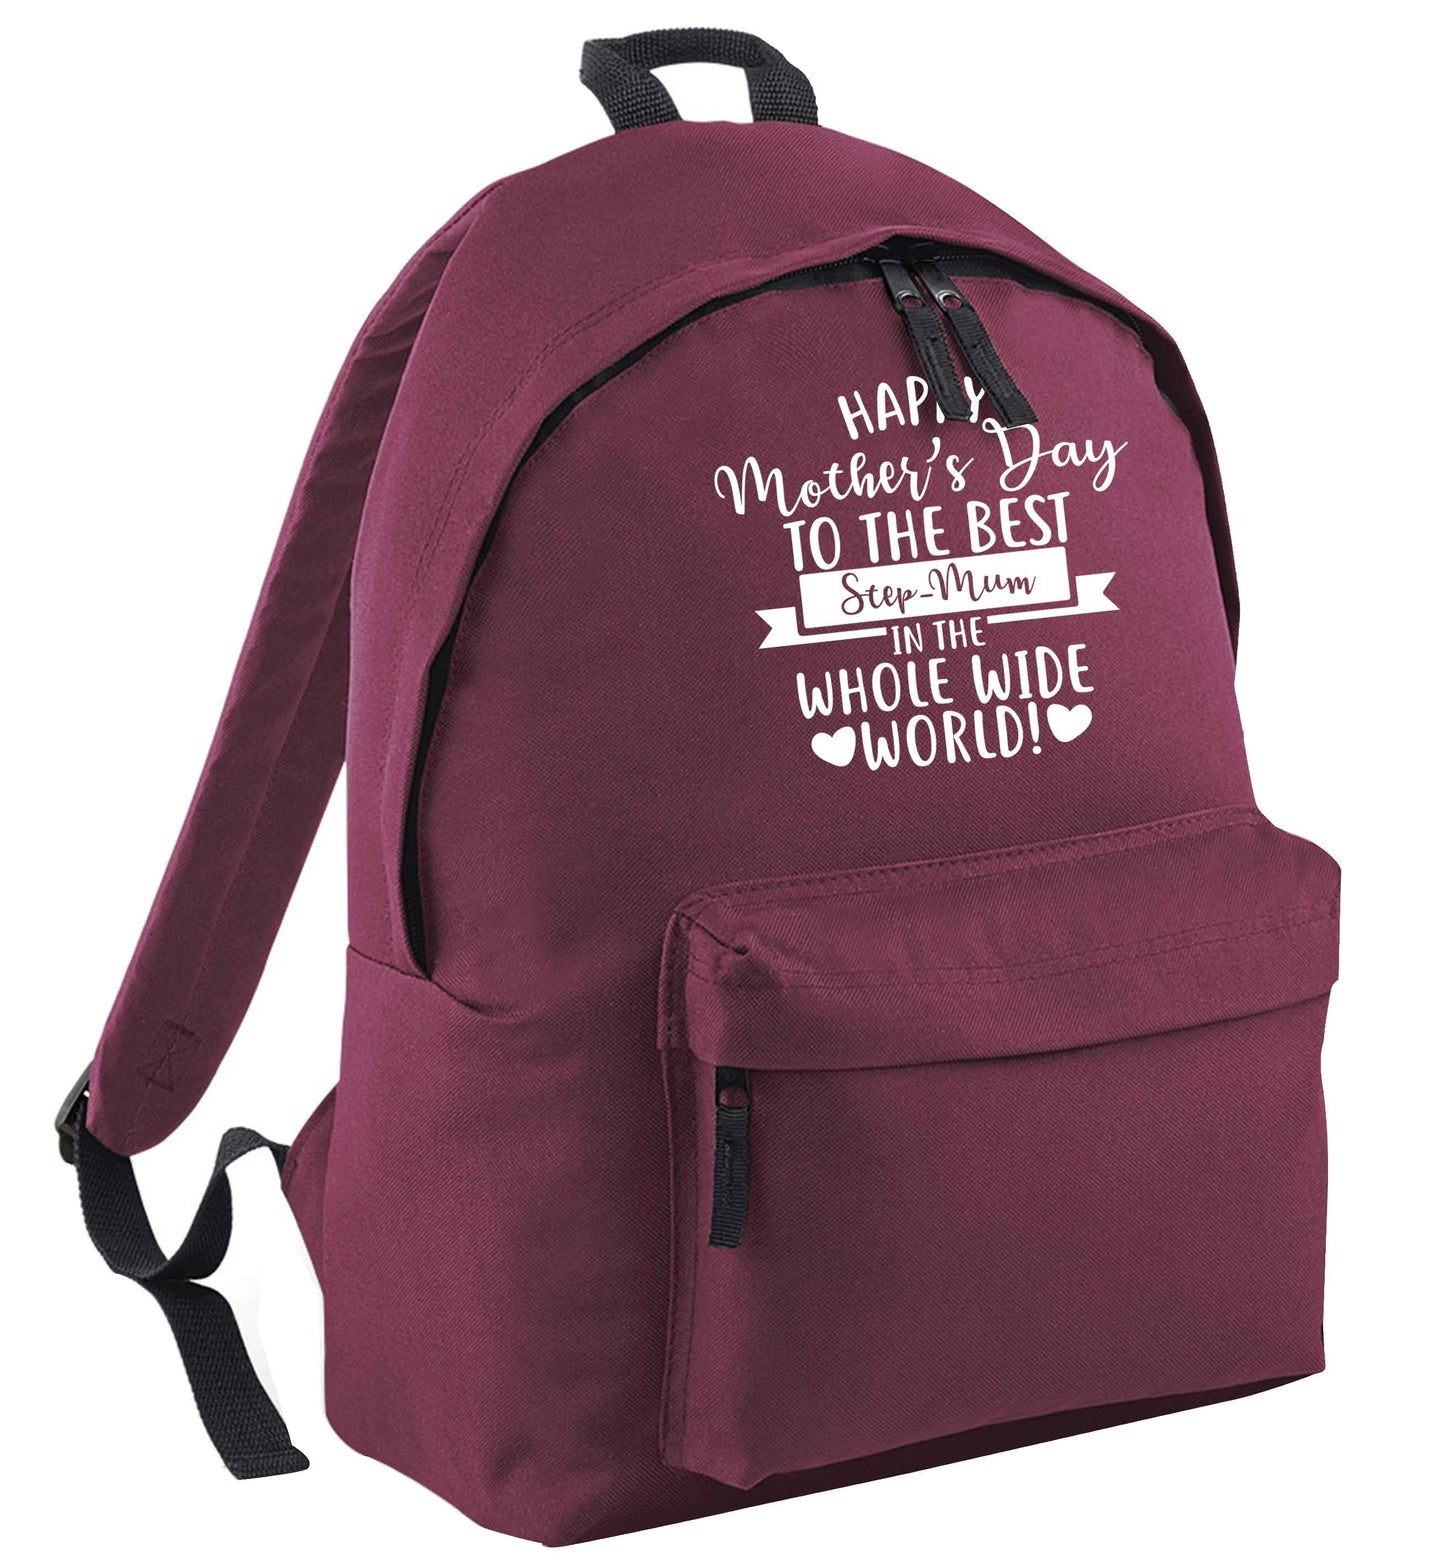 Happy mother's day to the best step-mum in the world black childrens backpack